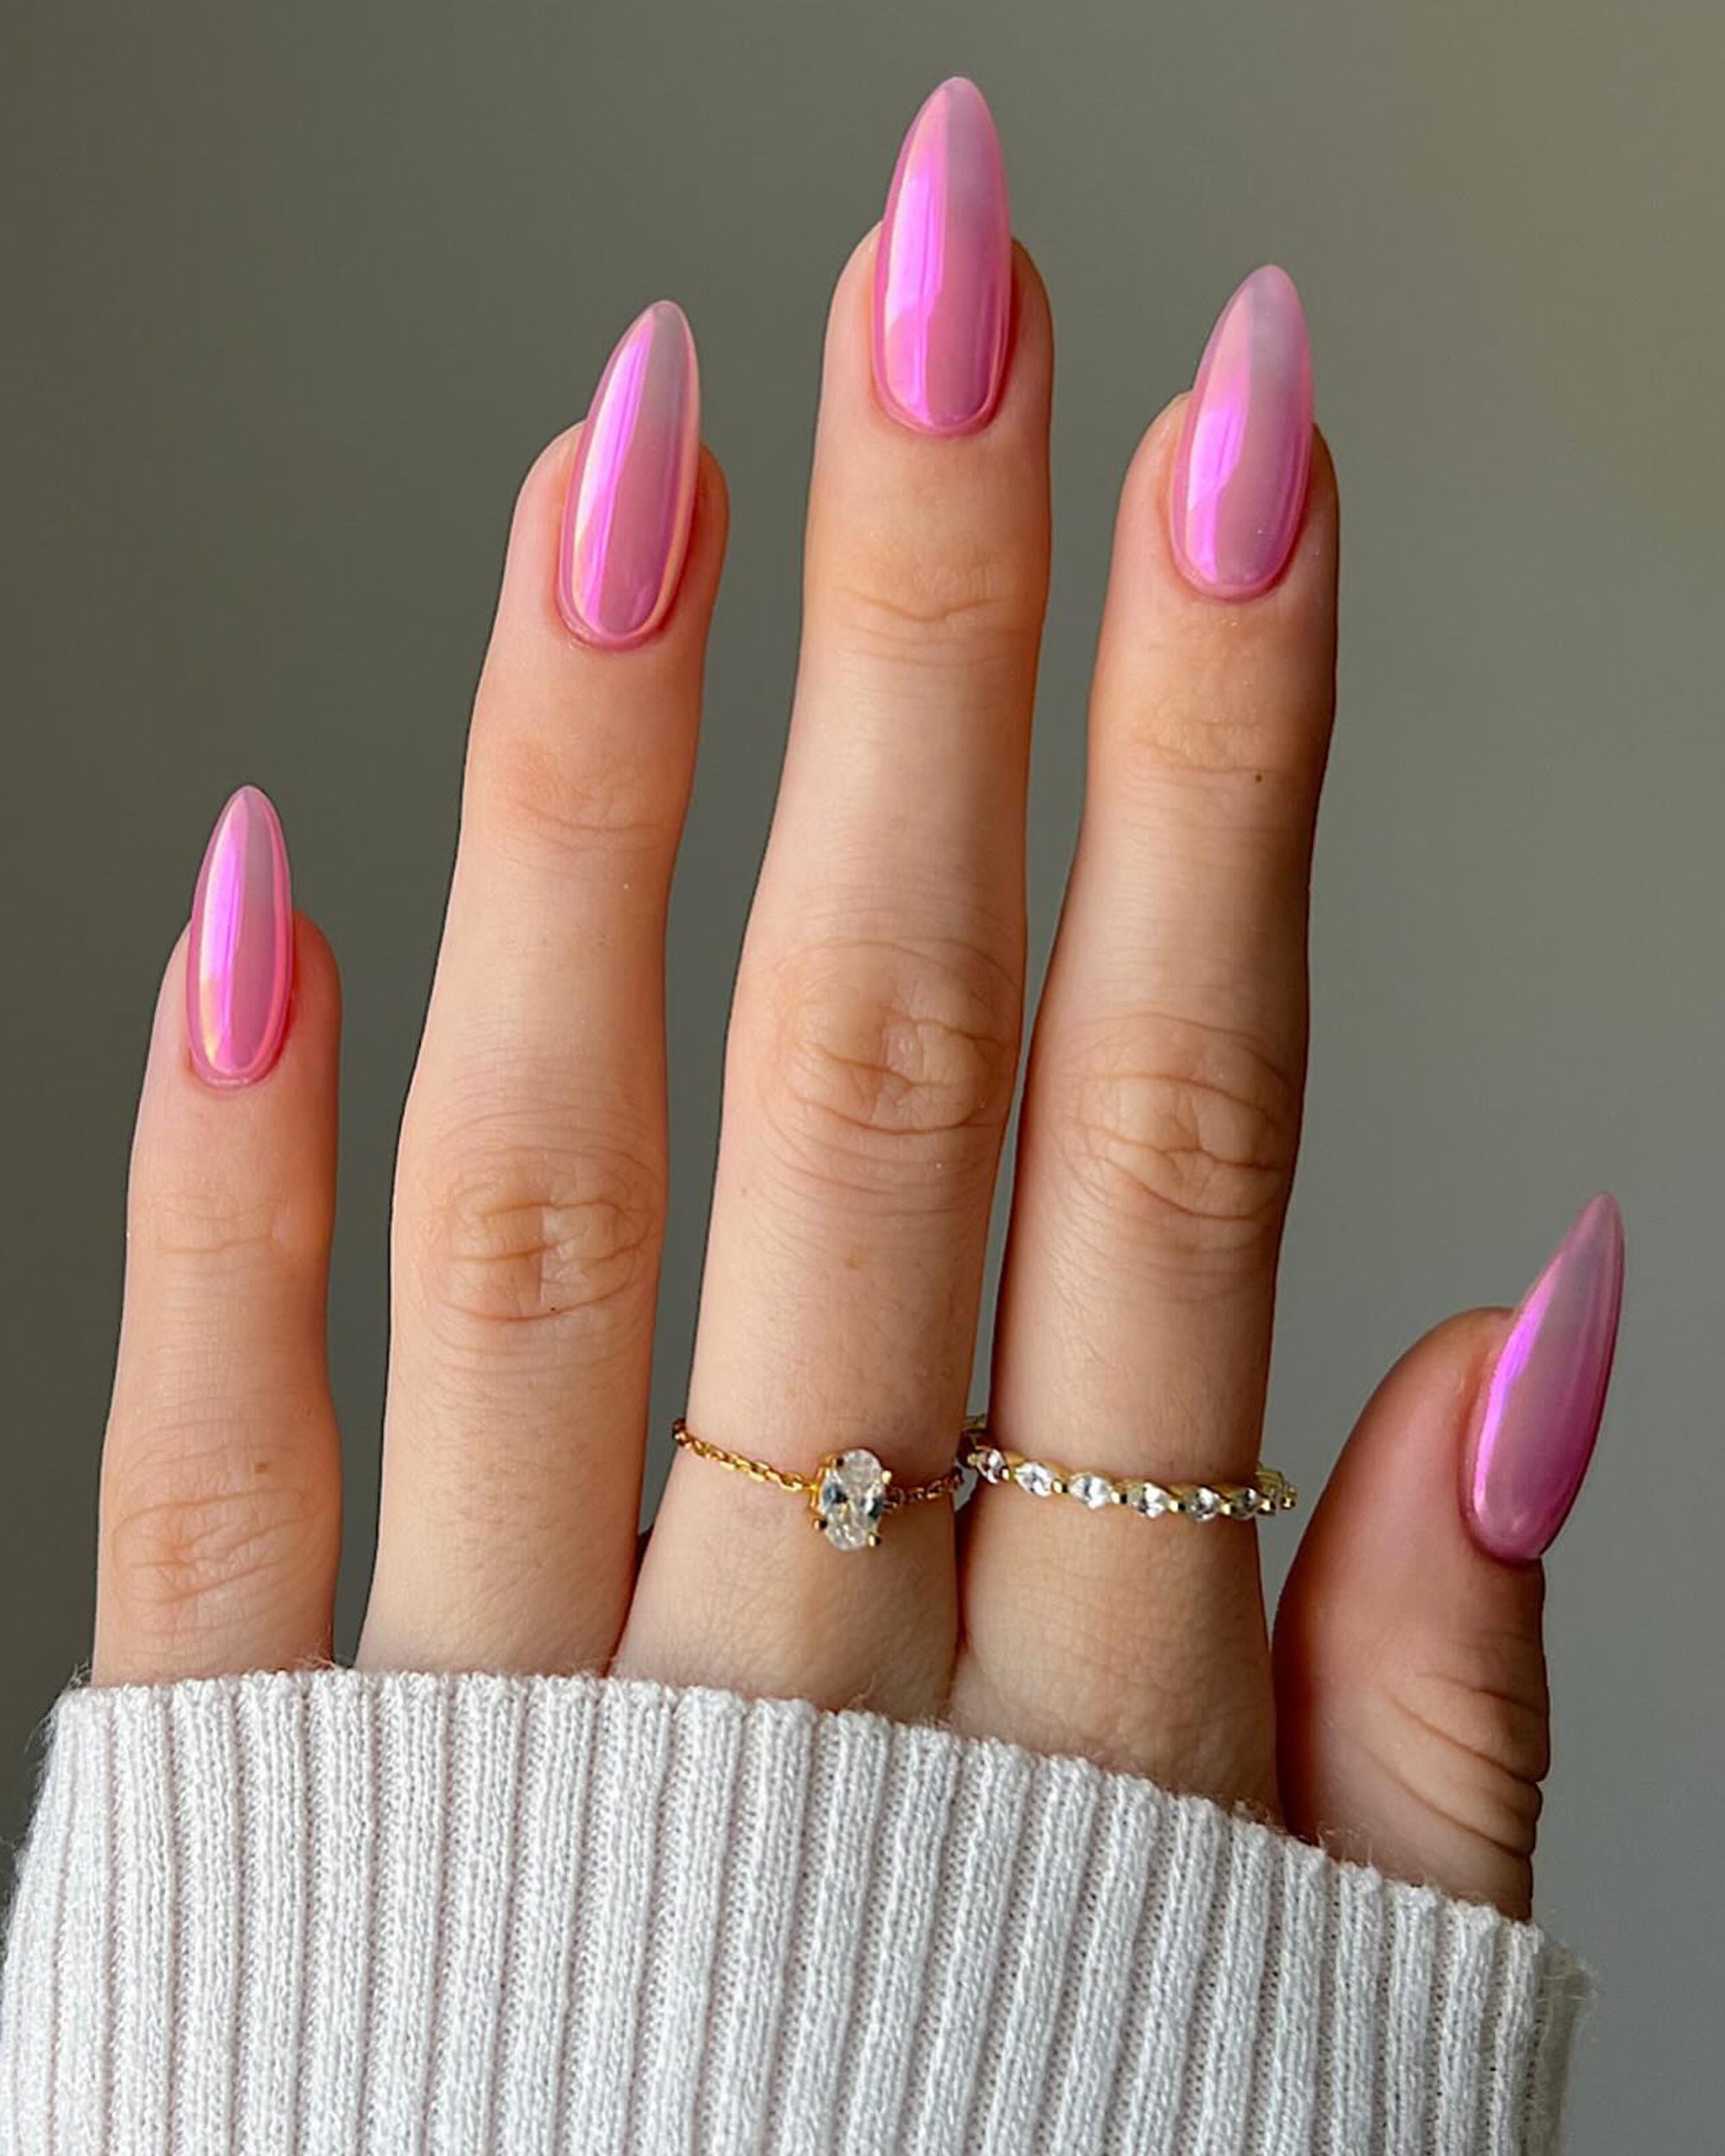 Is it normal for your acrylics to hurt after getting them done? - Quora